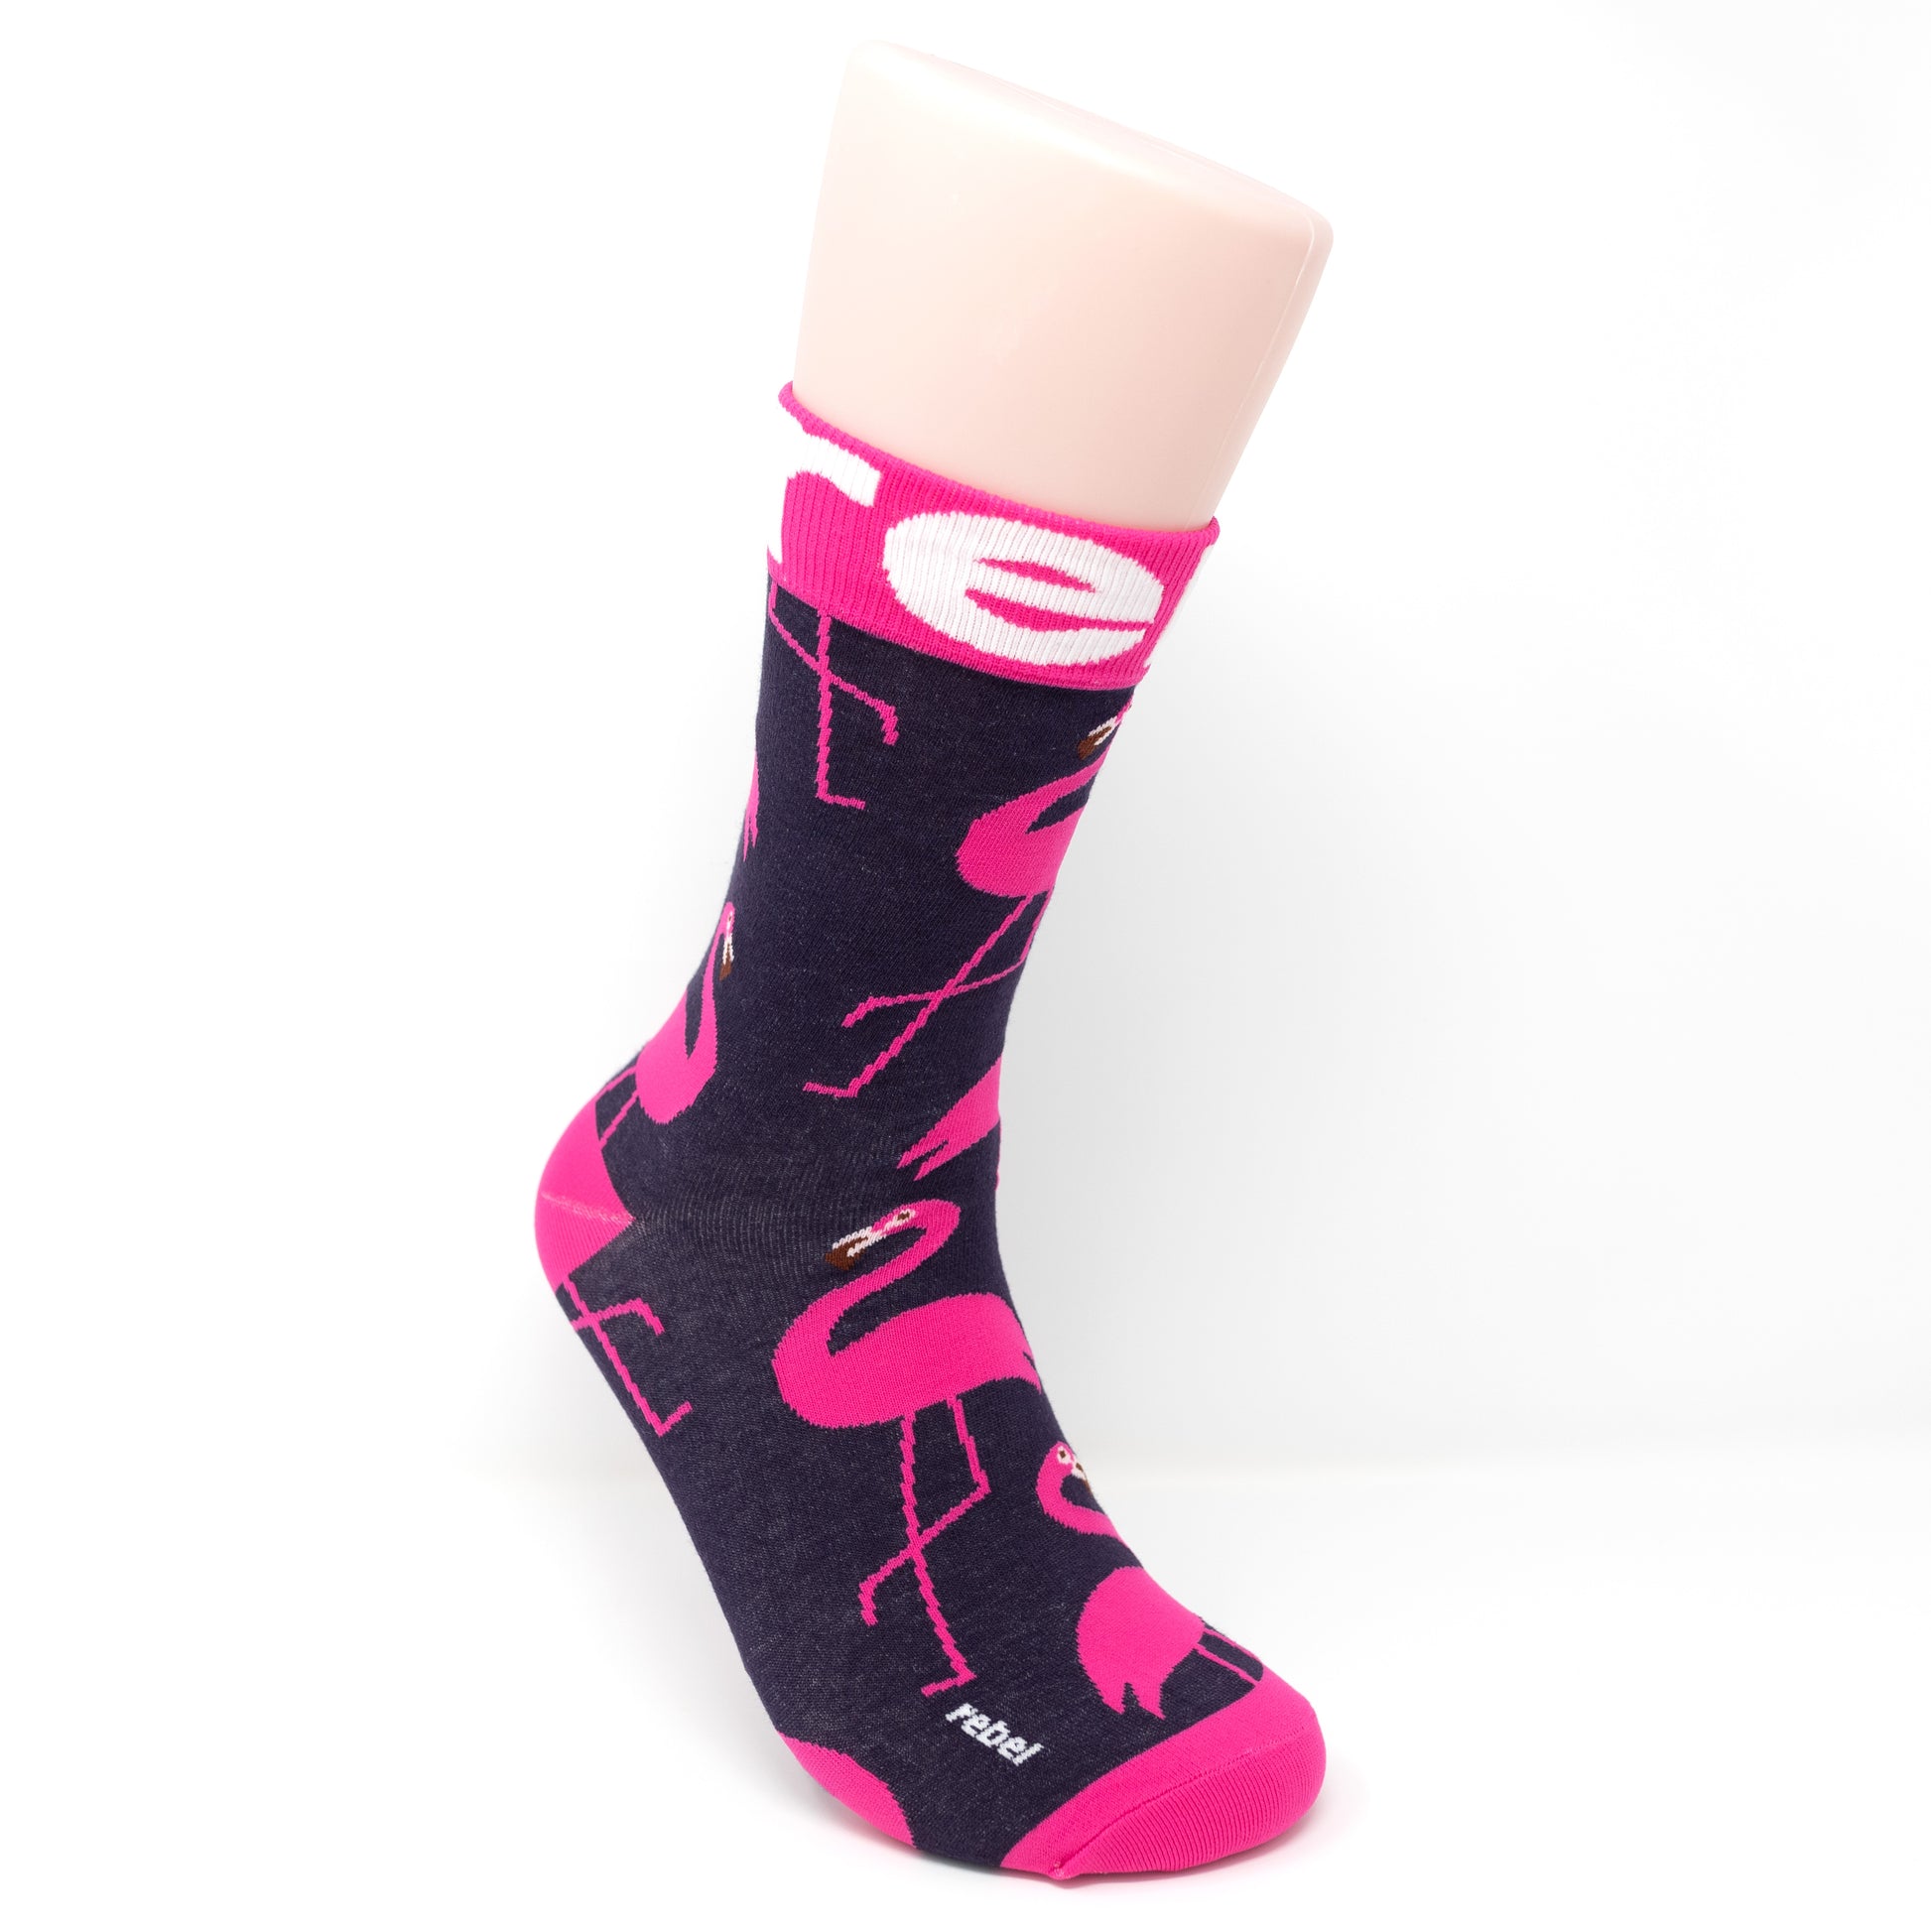 Featuring a playful and colourful design inspired by the majestic flamingo, these socks are sure to add a touch of fun to any outfit.